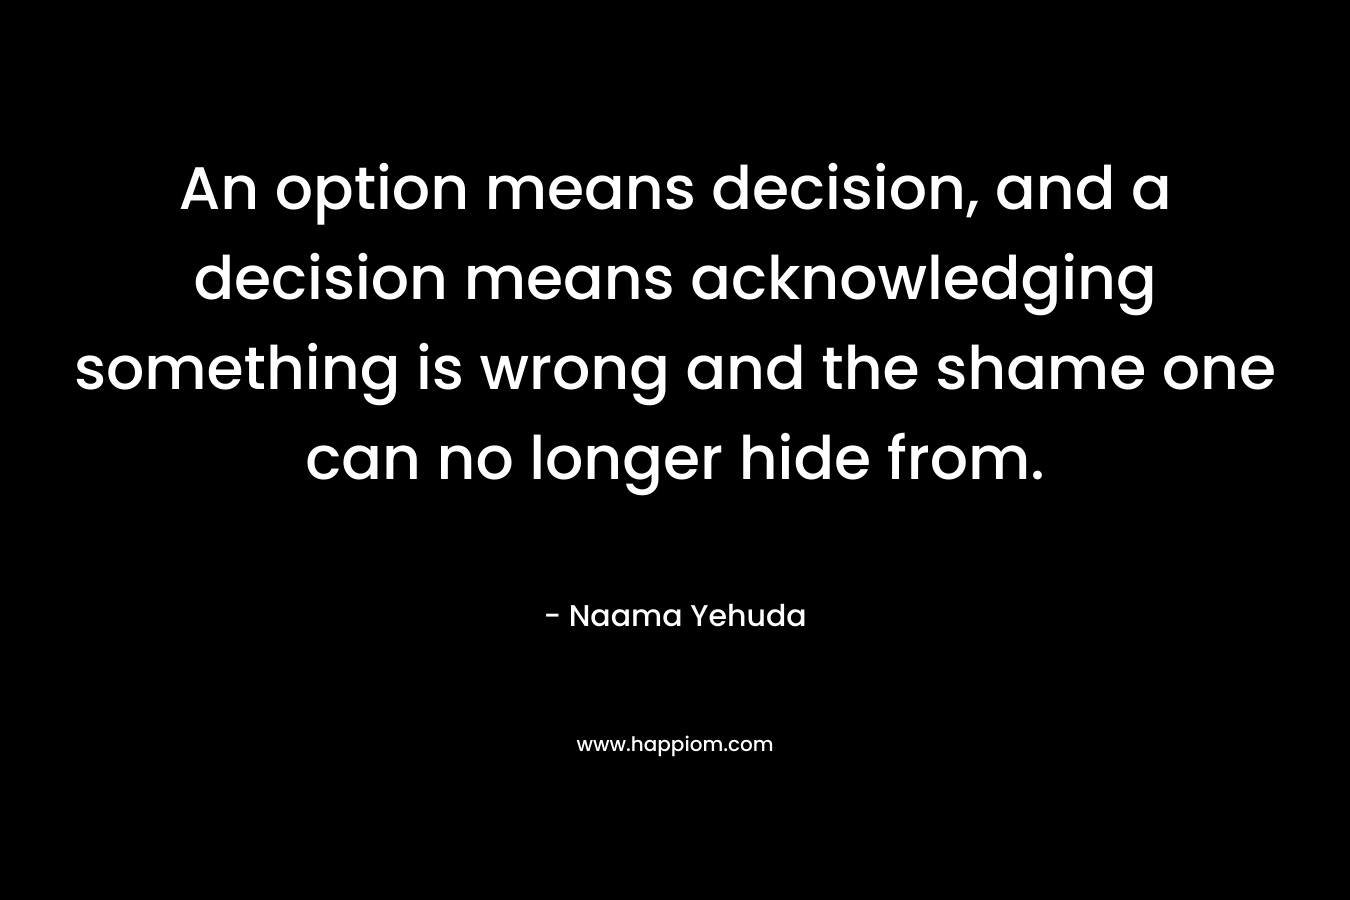 An option means decision, and a decision means acknowledging something is wrong and the shame one can no longer hide from.